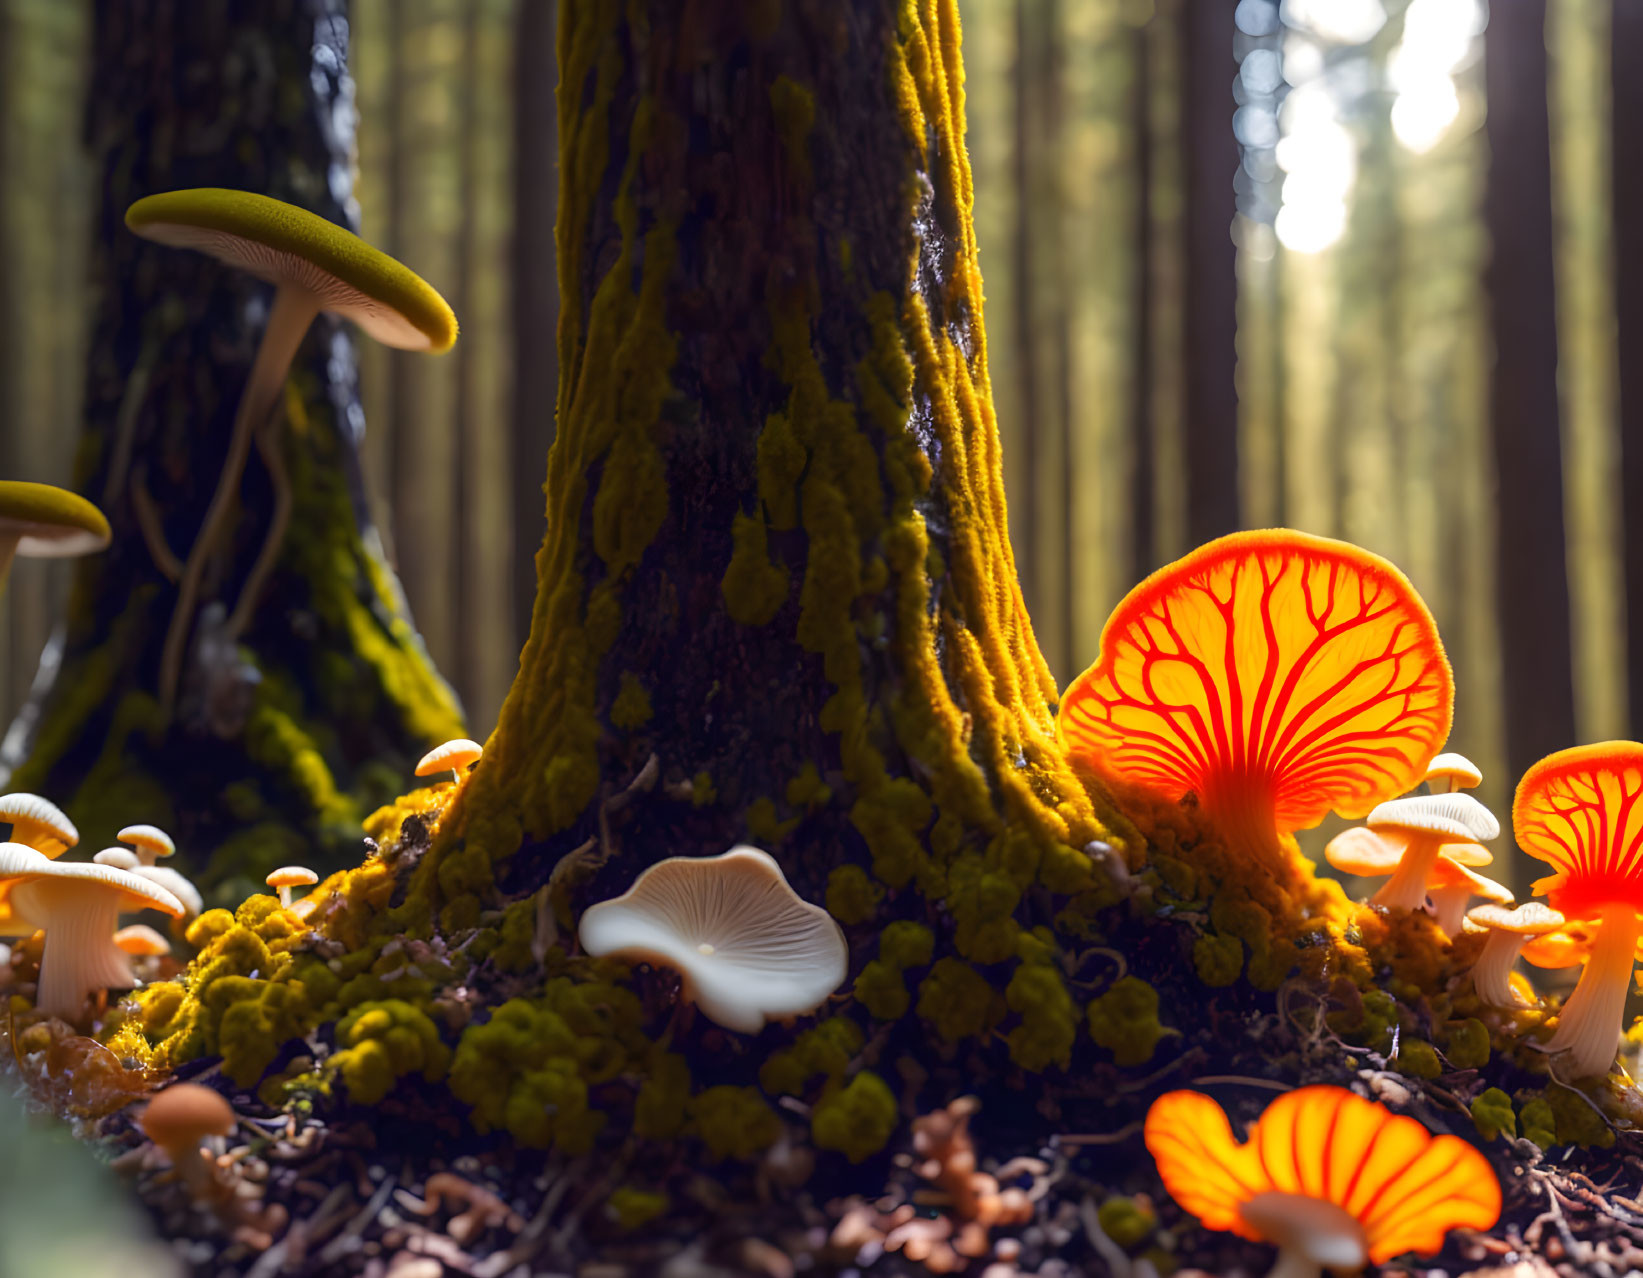 Forest scene: Glowing mushrooms by mossy tree trunk with sunlight.